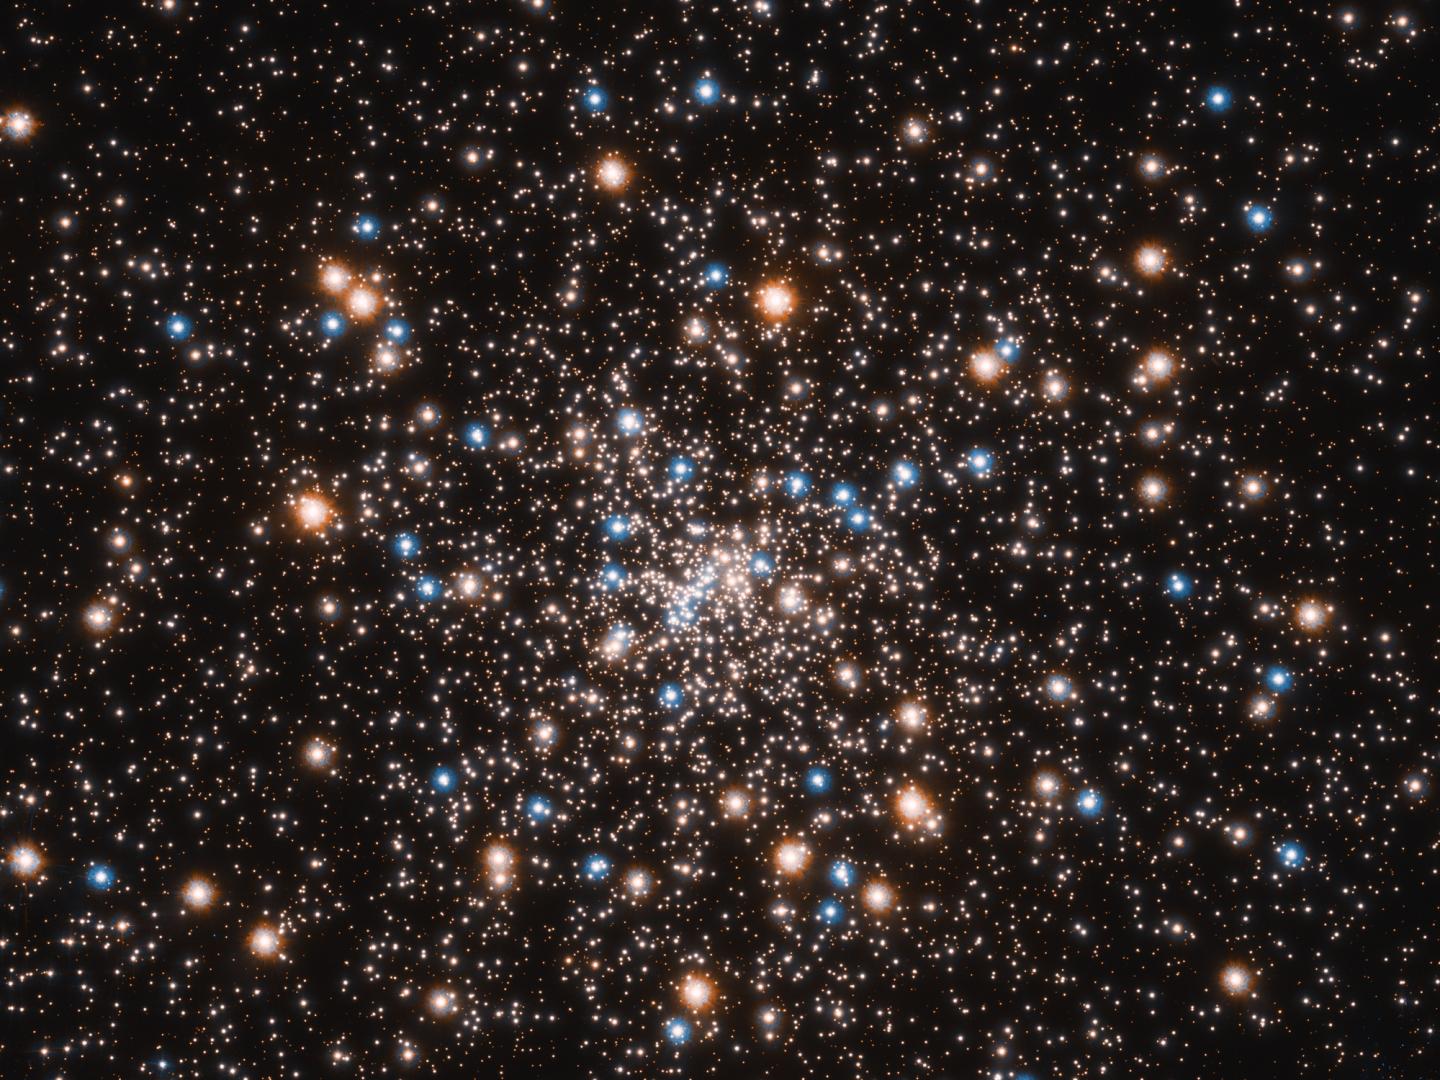 Hubble Uncovers a Concentration of Small Black Holes